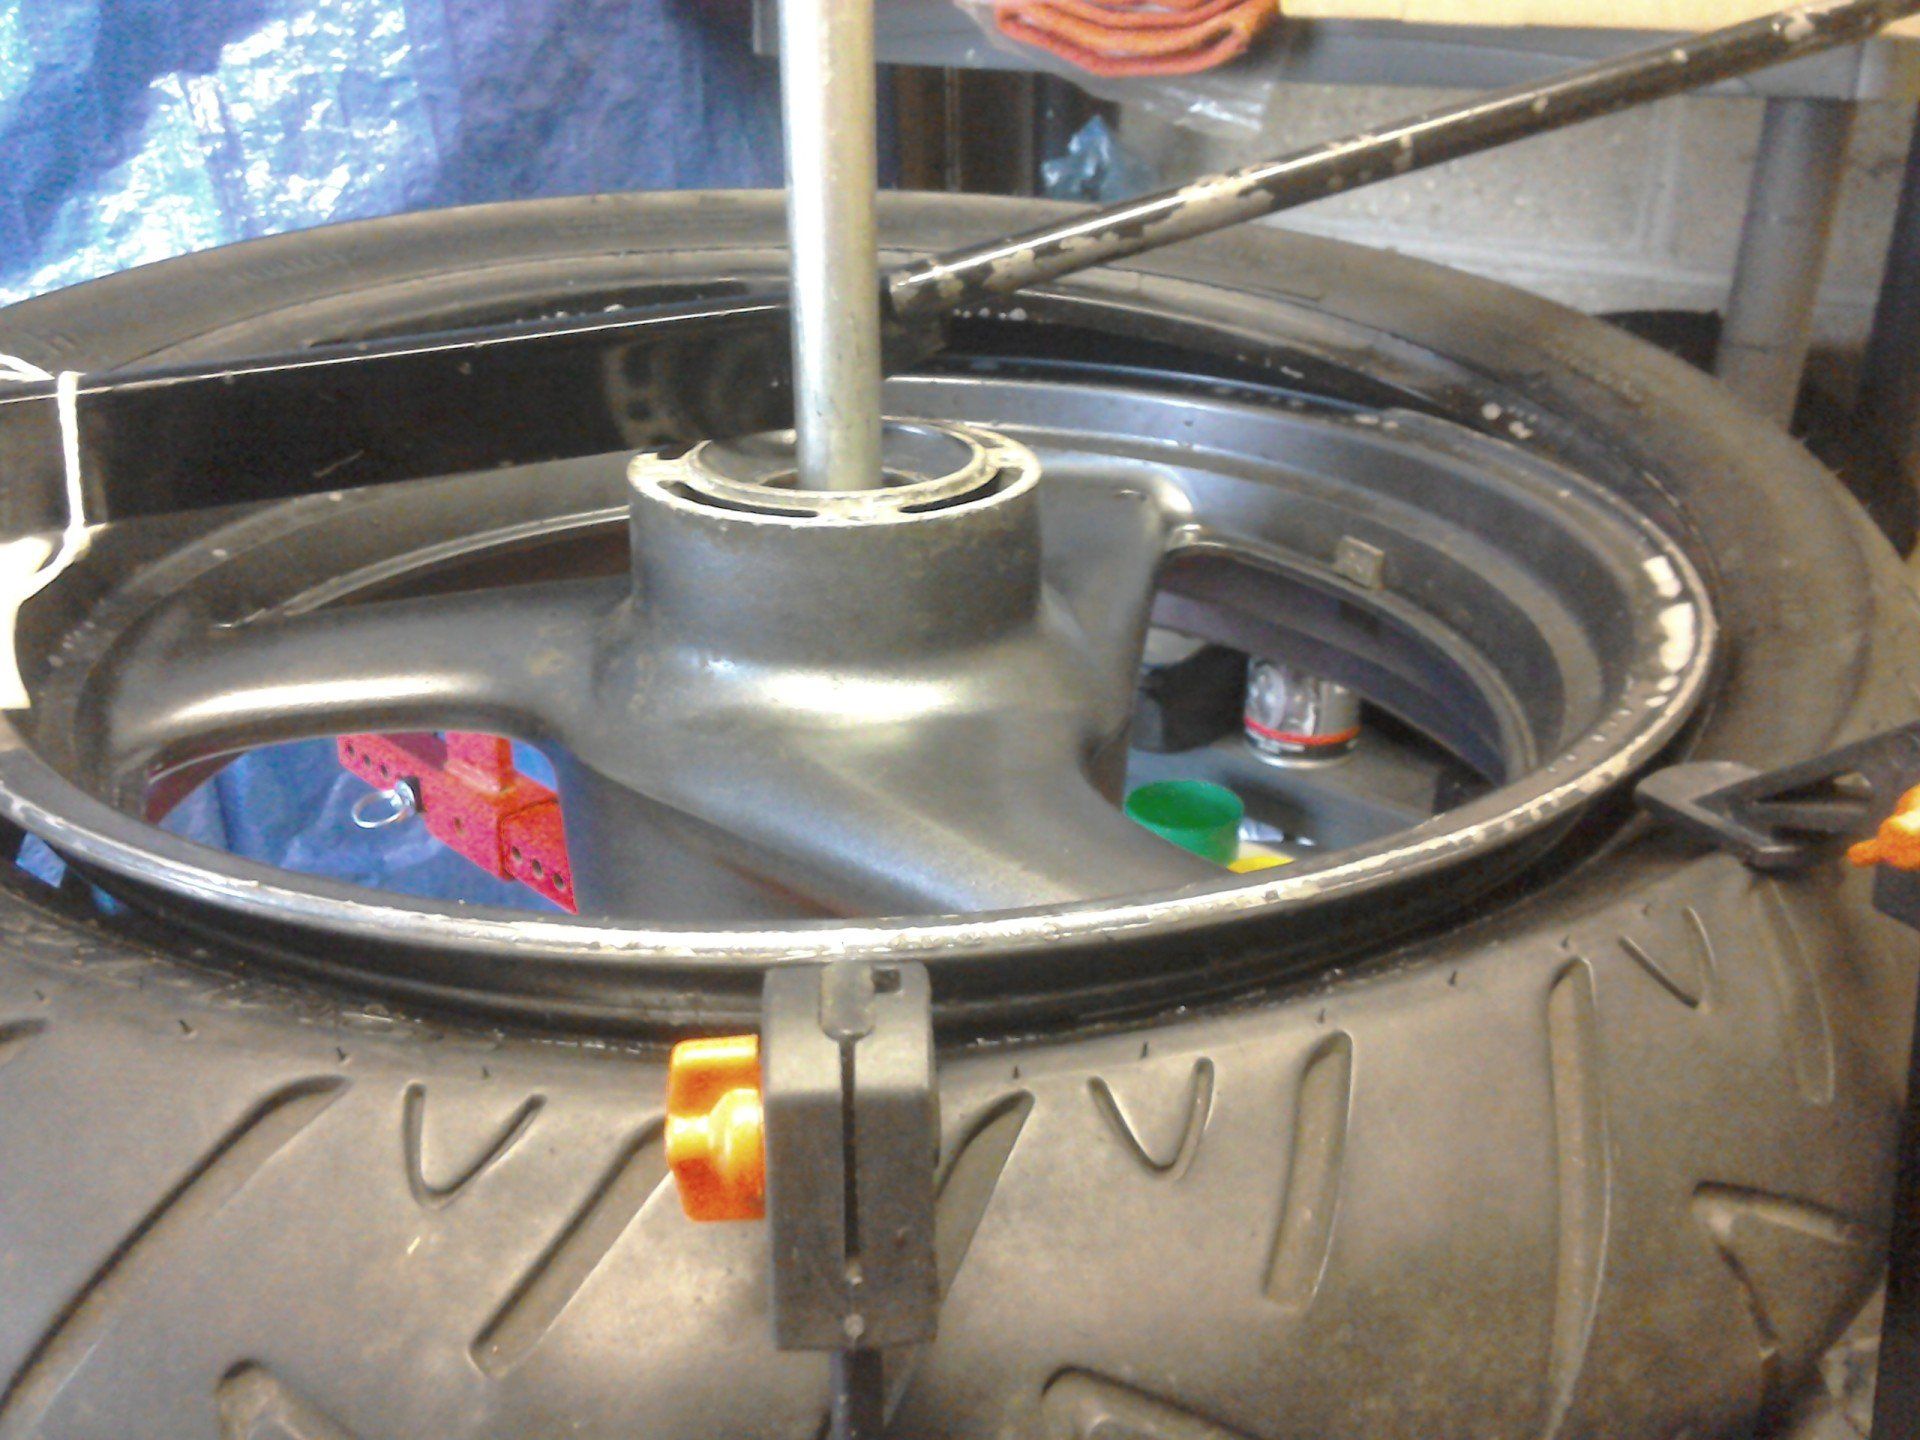 Using clamps to force tyre beads into the well